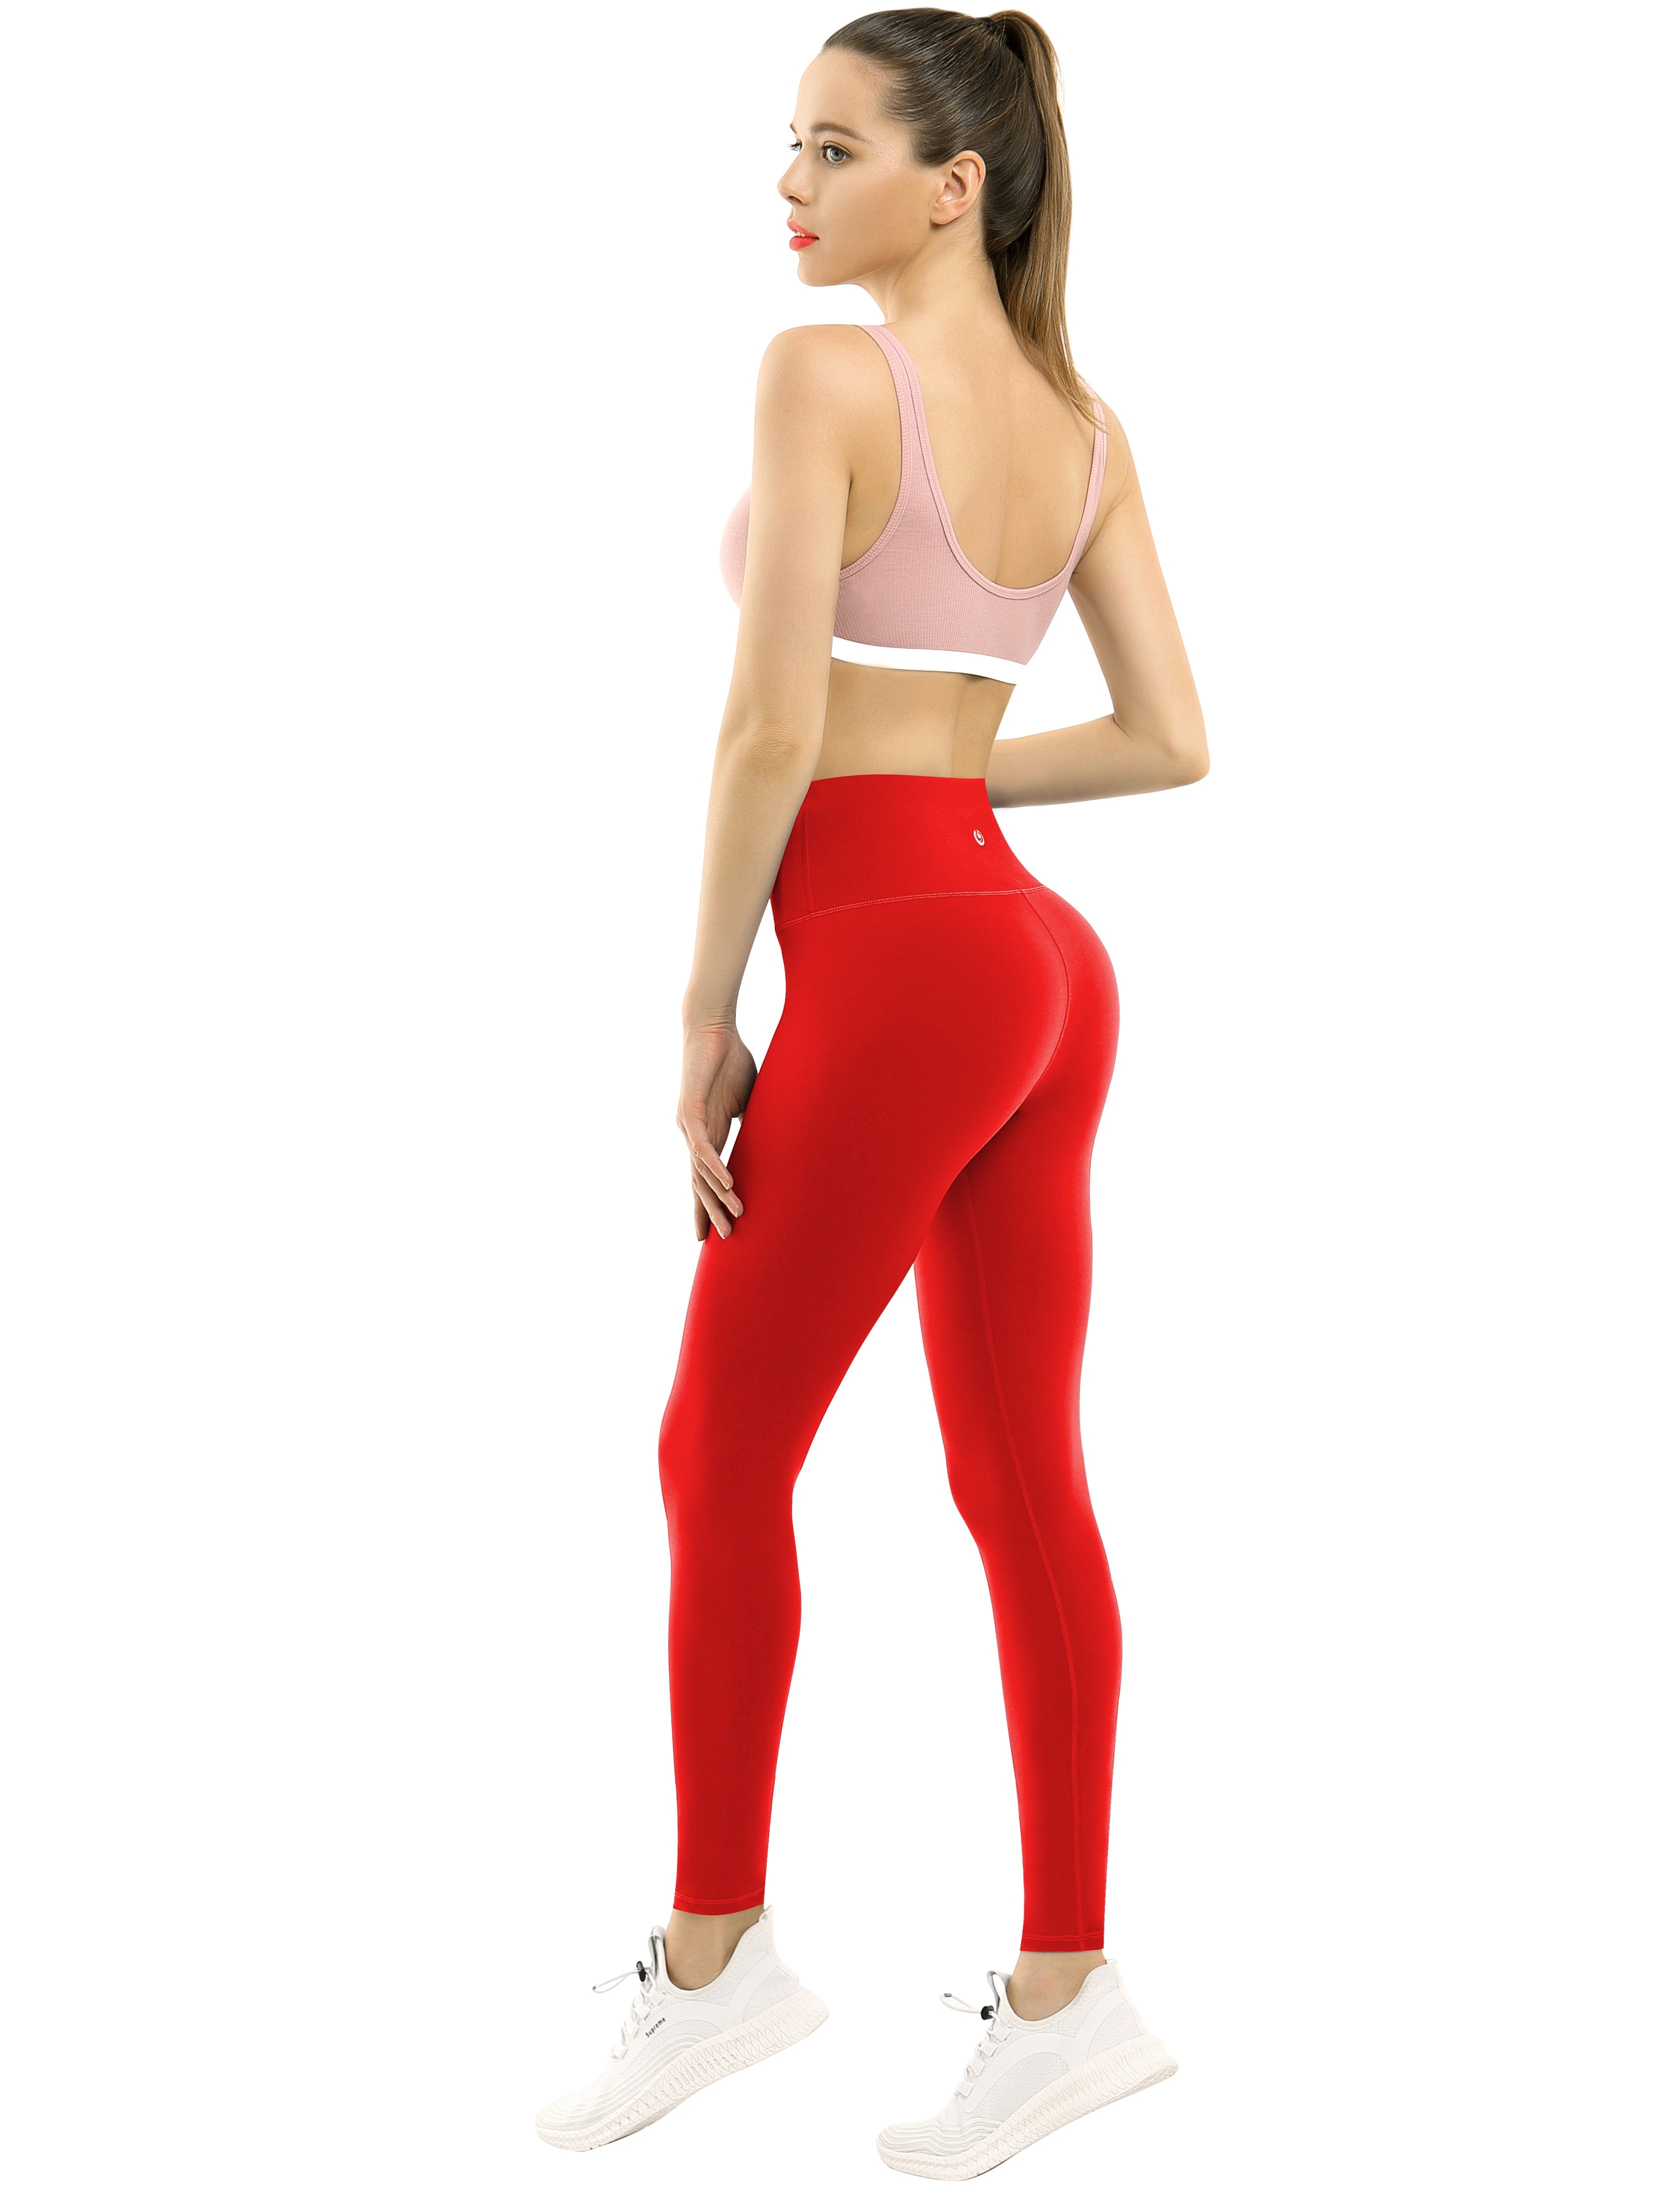 High Waist Pilates Pants scarlet 75%Nylon/25%Spandex Fabric doesn't attract lint easily 4-way stretch No see-through Moisture-wicking Tummy control Inner pocket Four lengths